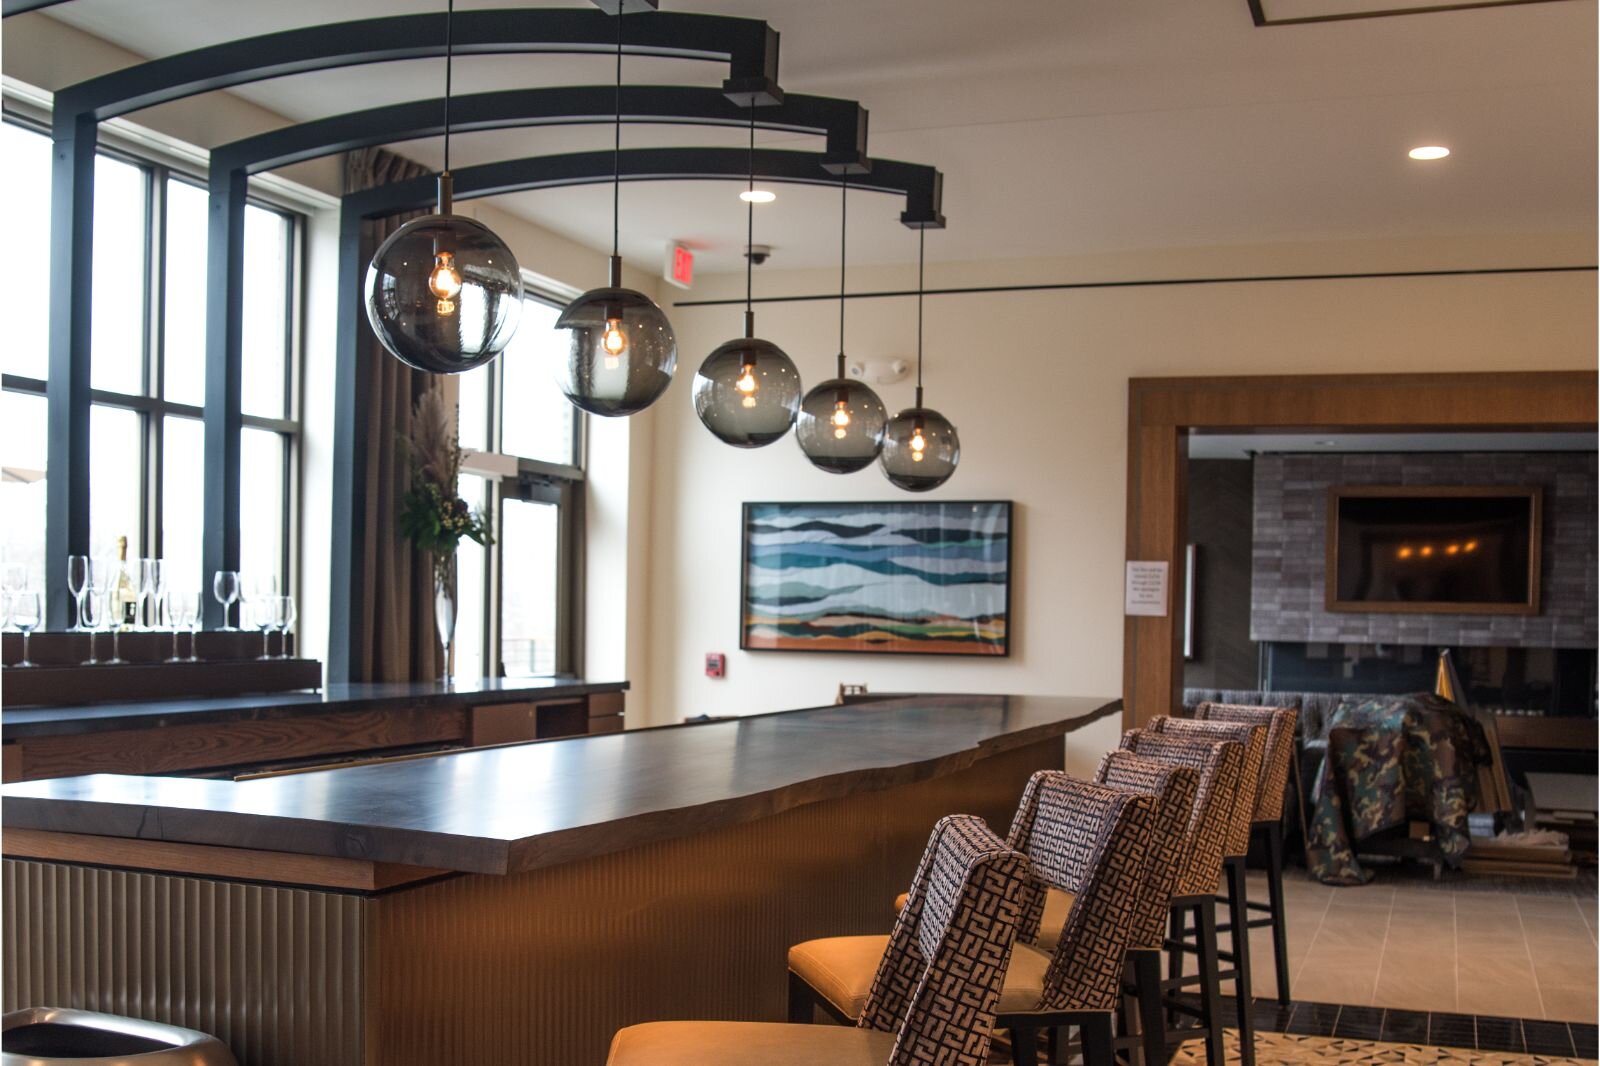 According to leaders at the Heritage Community of Kalamazoo, the next generation of retirees want to enjoy life. A bar is off the lobby of the new Revel Creek independent living community for older adults.